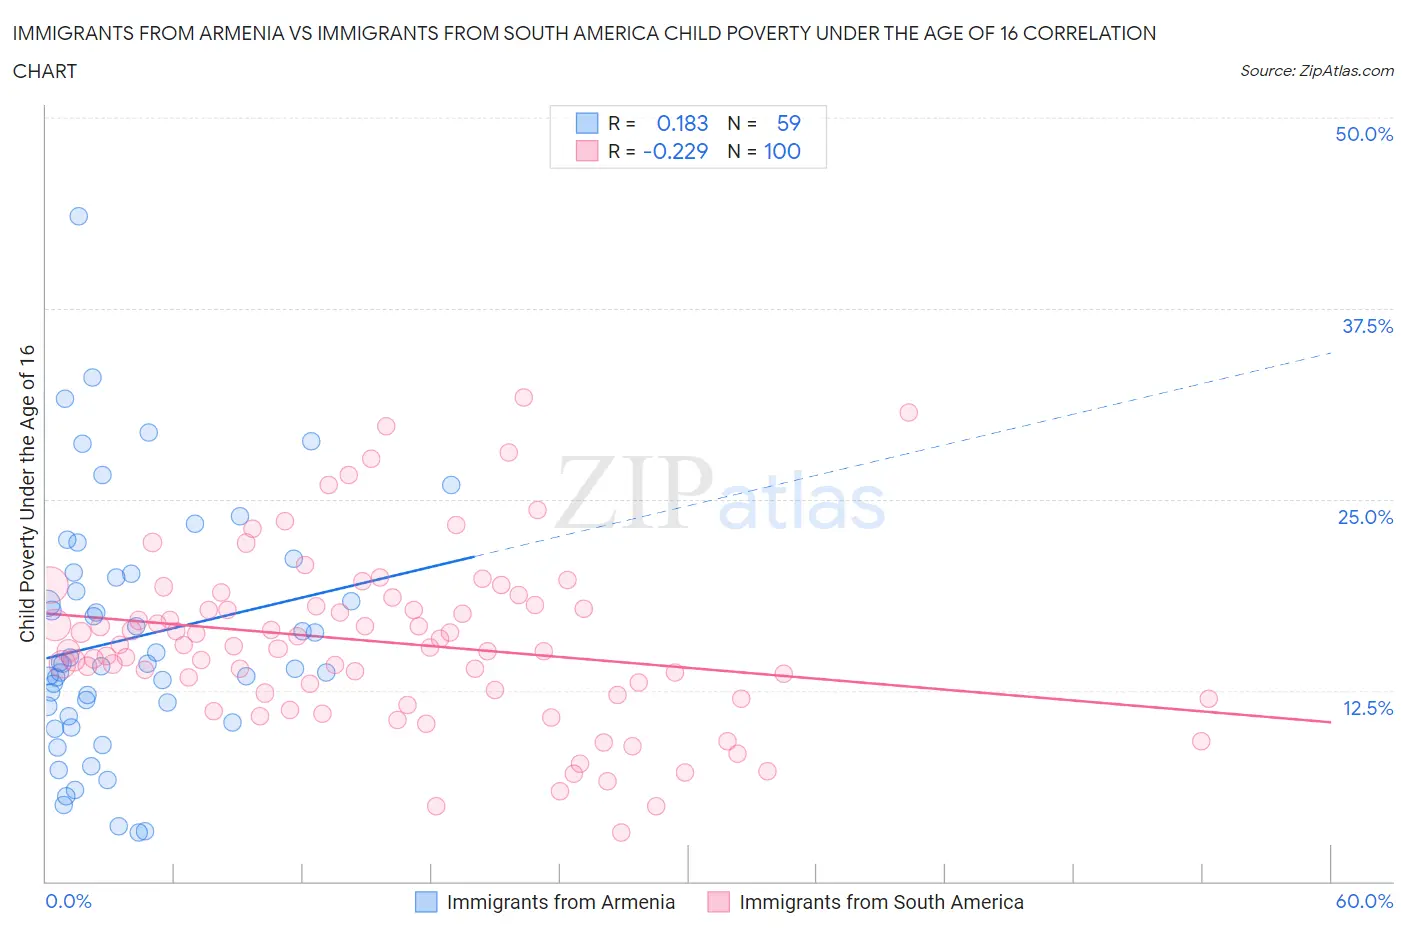 Immigrants from Armenia vs Immigrants from South America Child Poverty Under the Age of 16